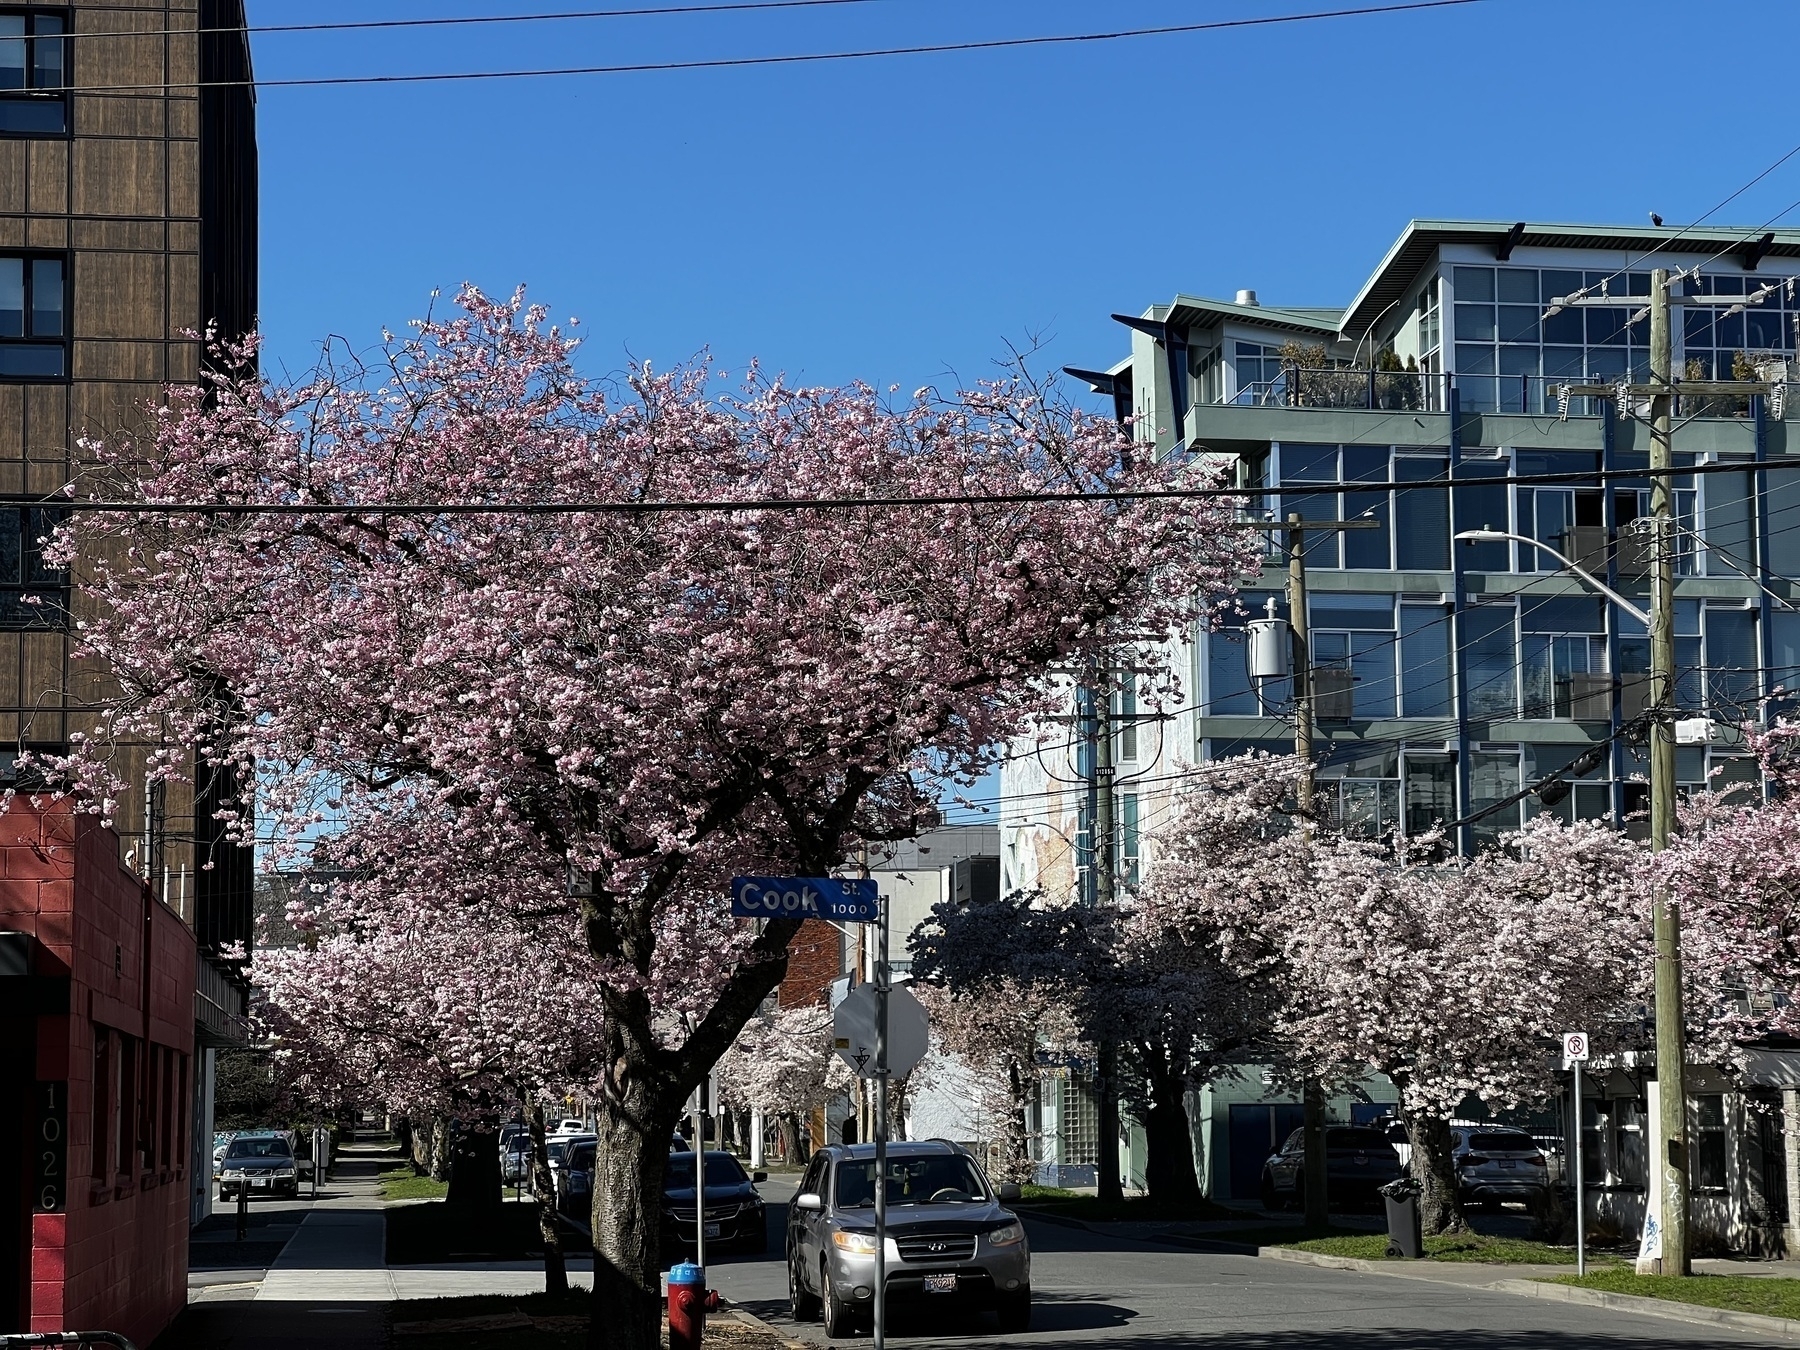 Residential street lined with cherry trees, all in bloom, with a mid-rise in the background.